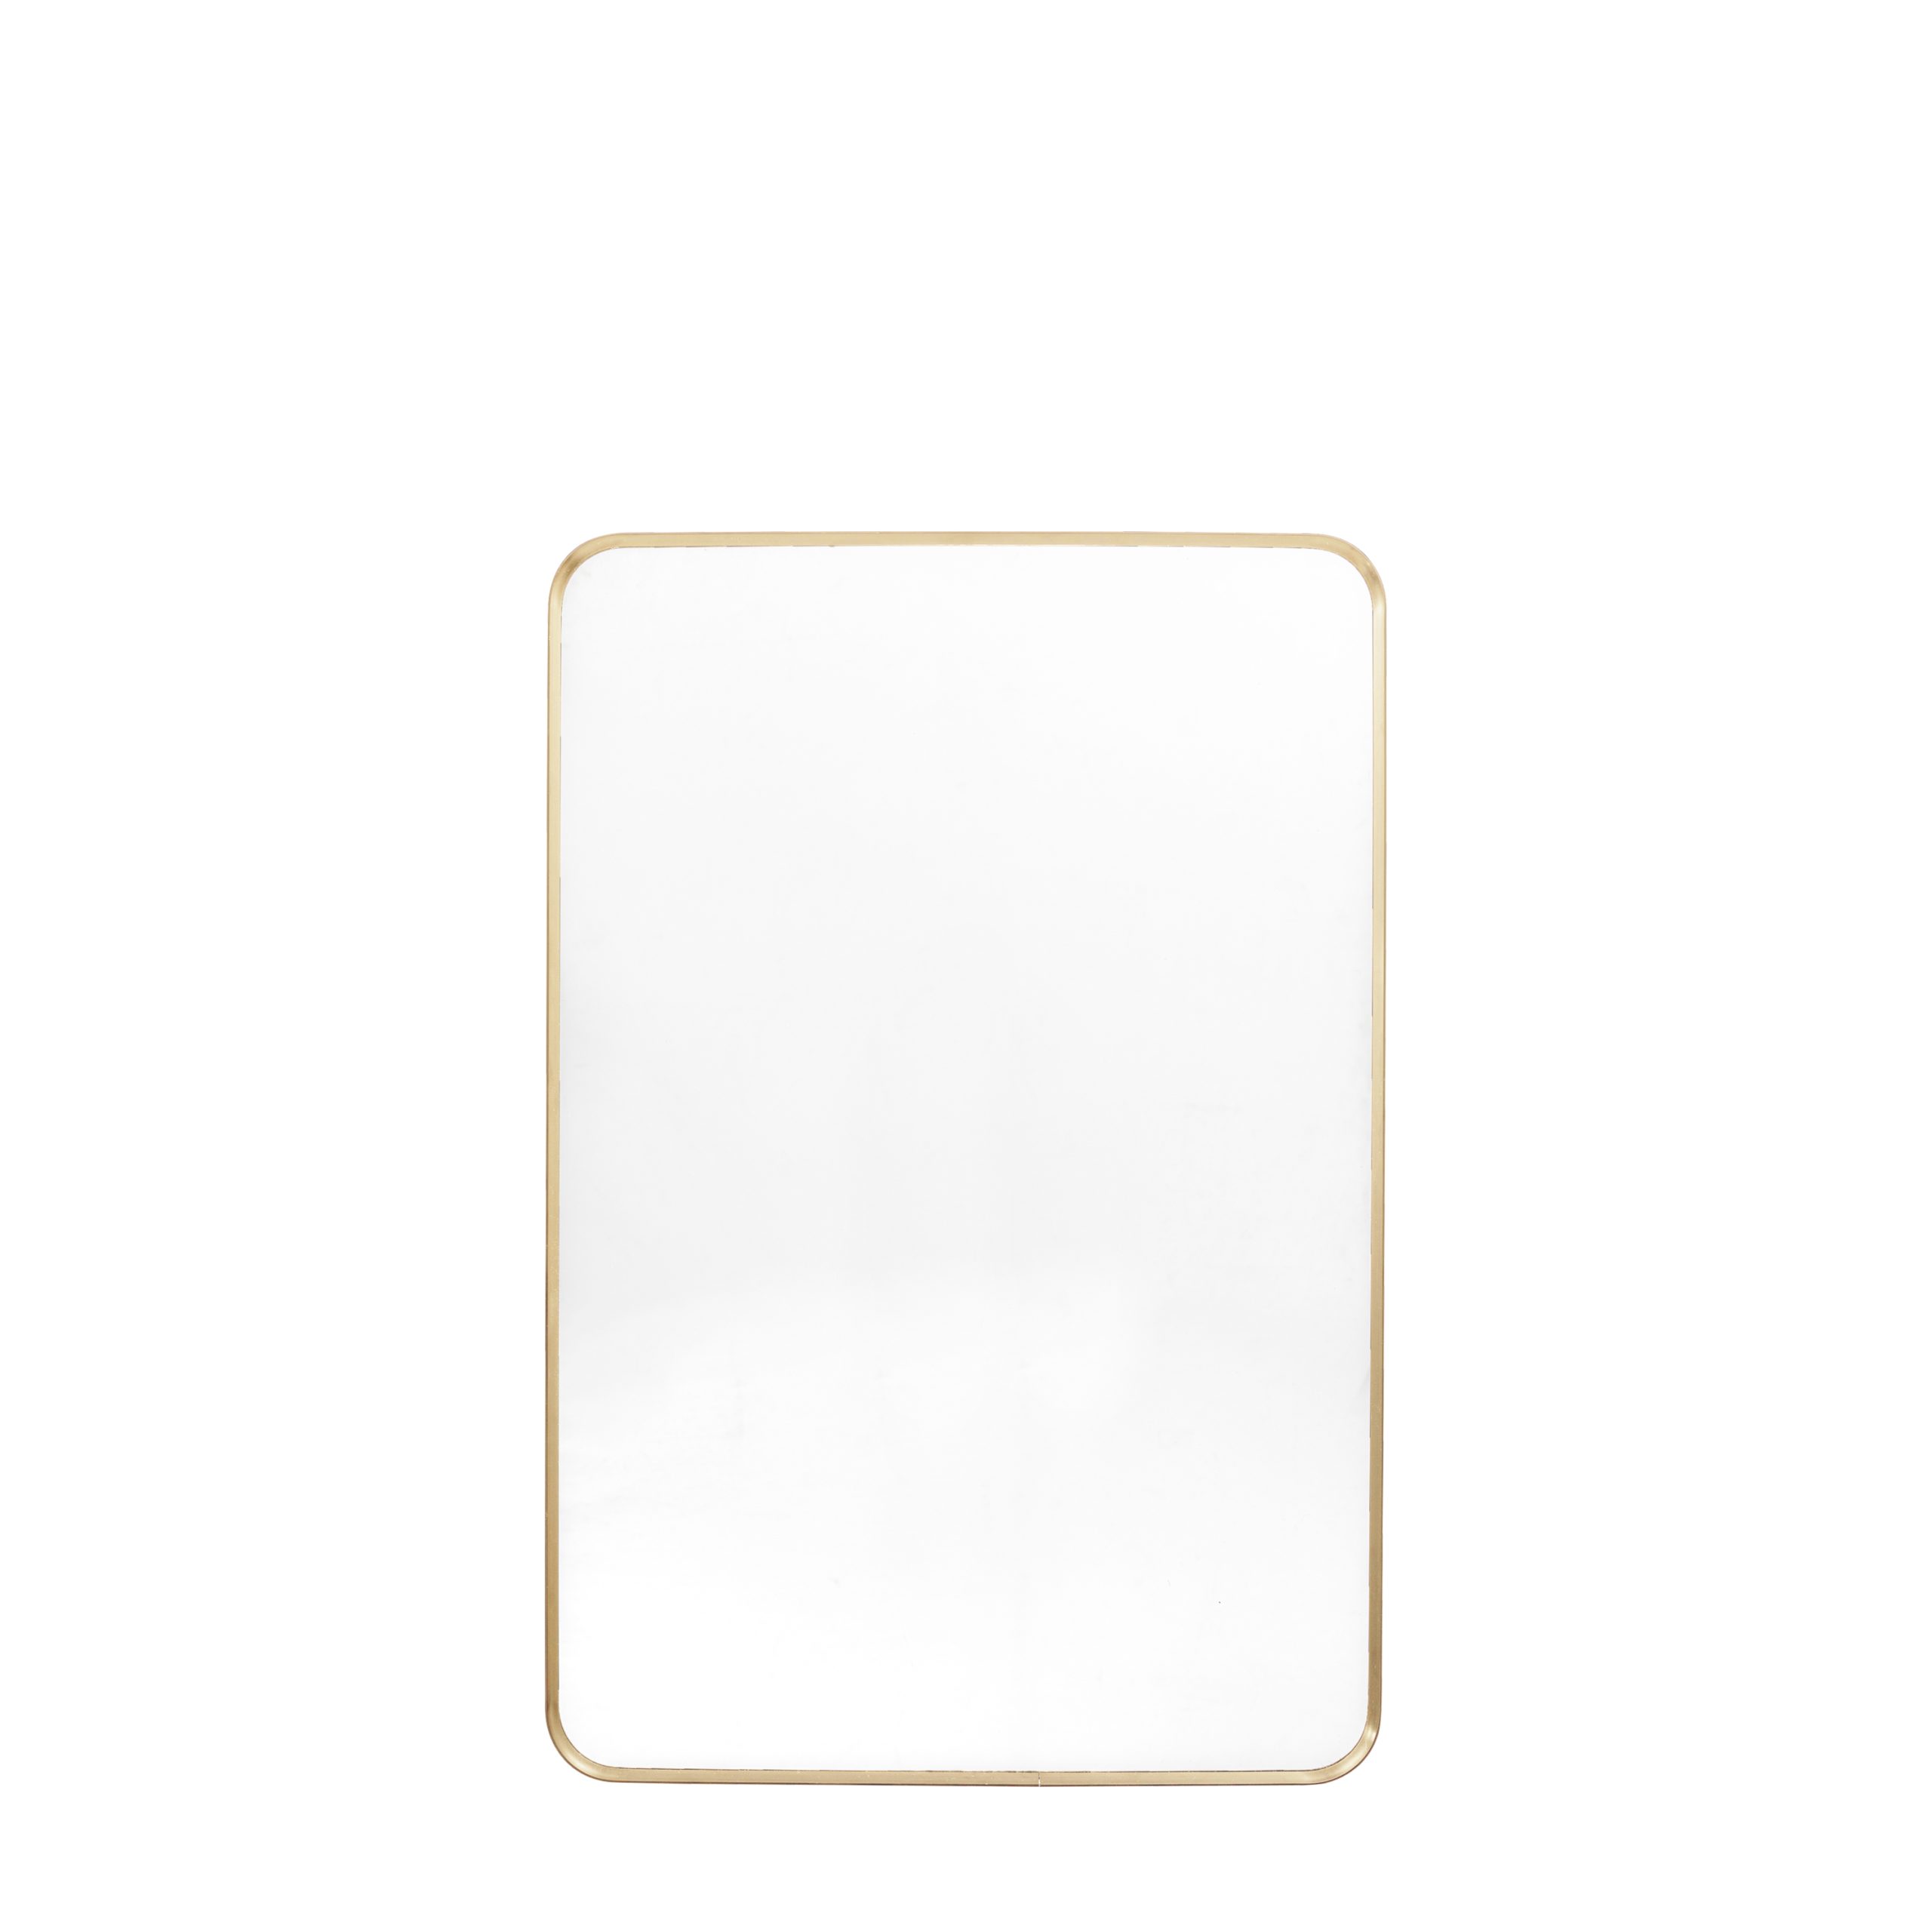 Gallery Direct Holworth Rectangle Mirror Gold